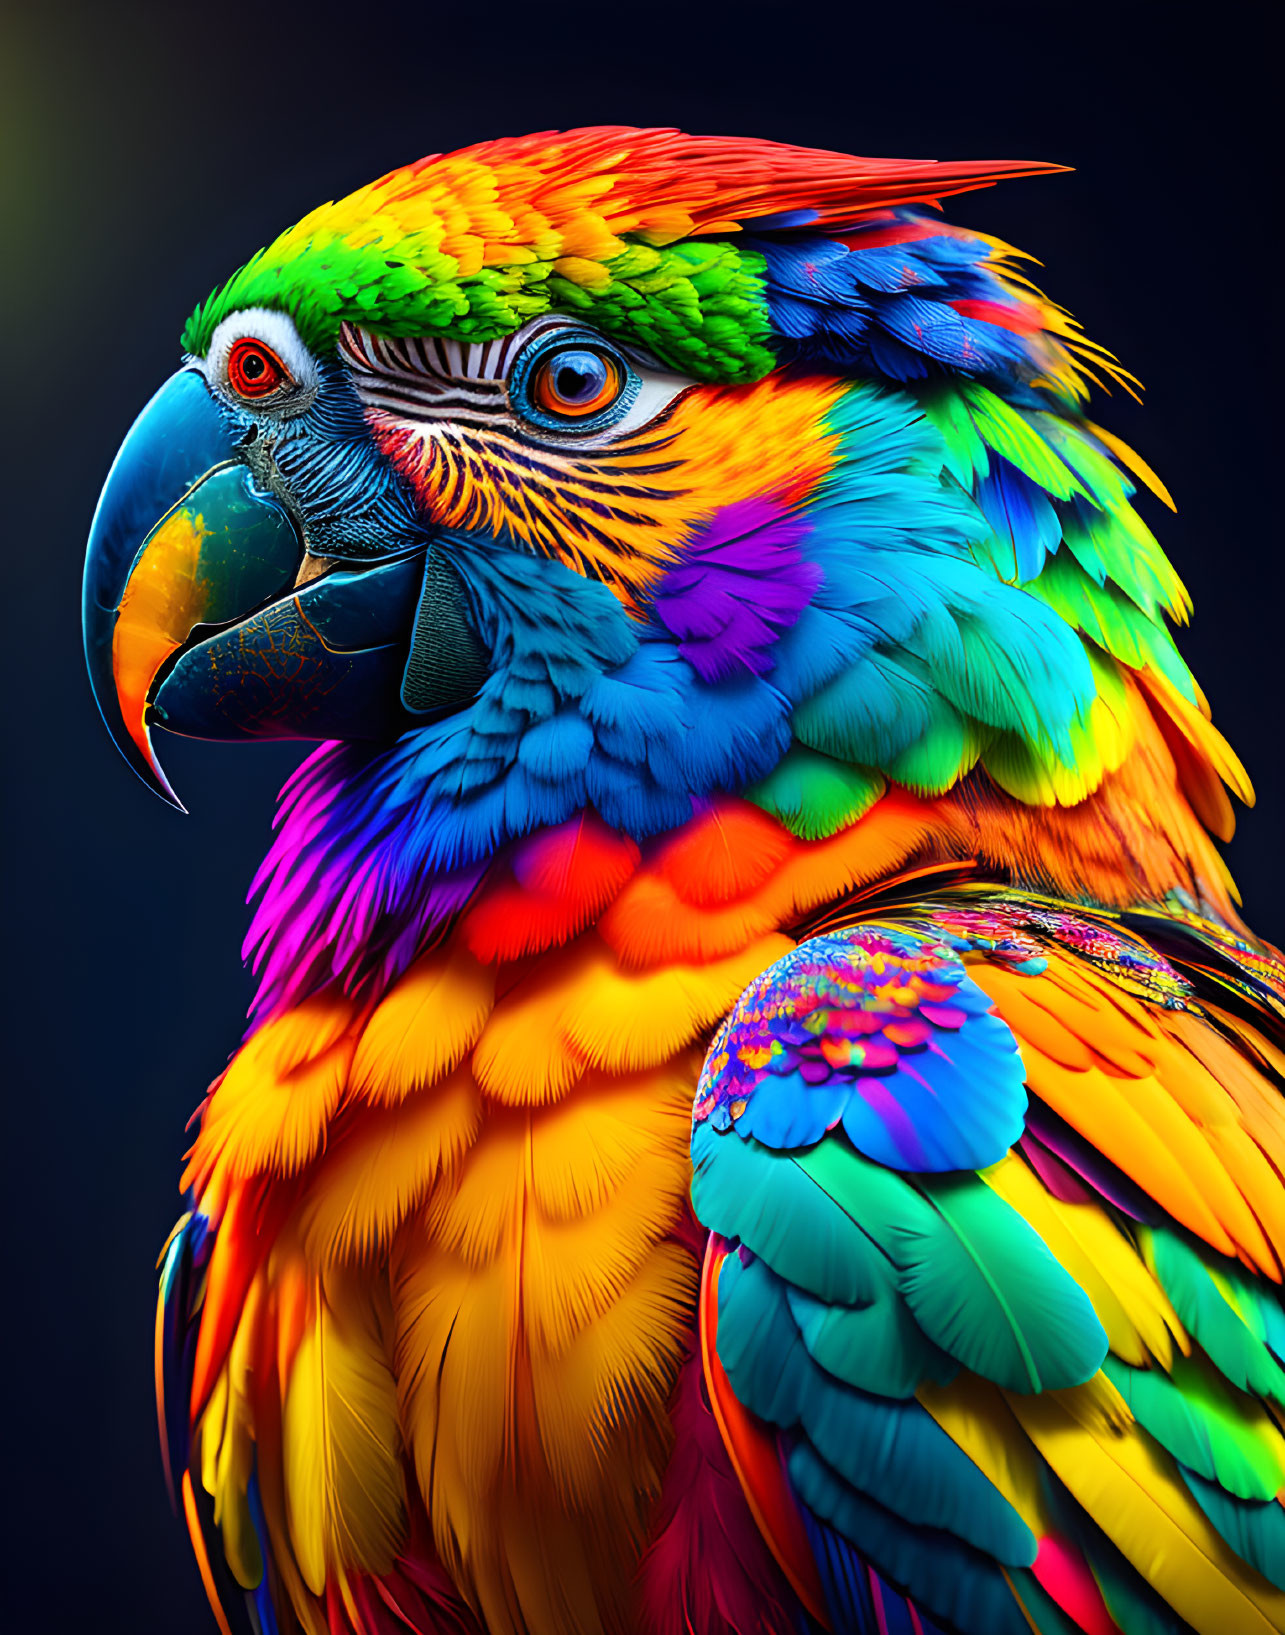 Colorful Macaw with Bright Feathers on Dark Background